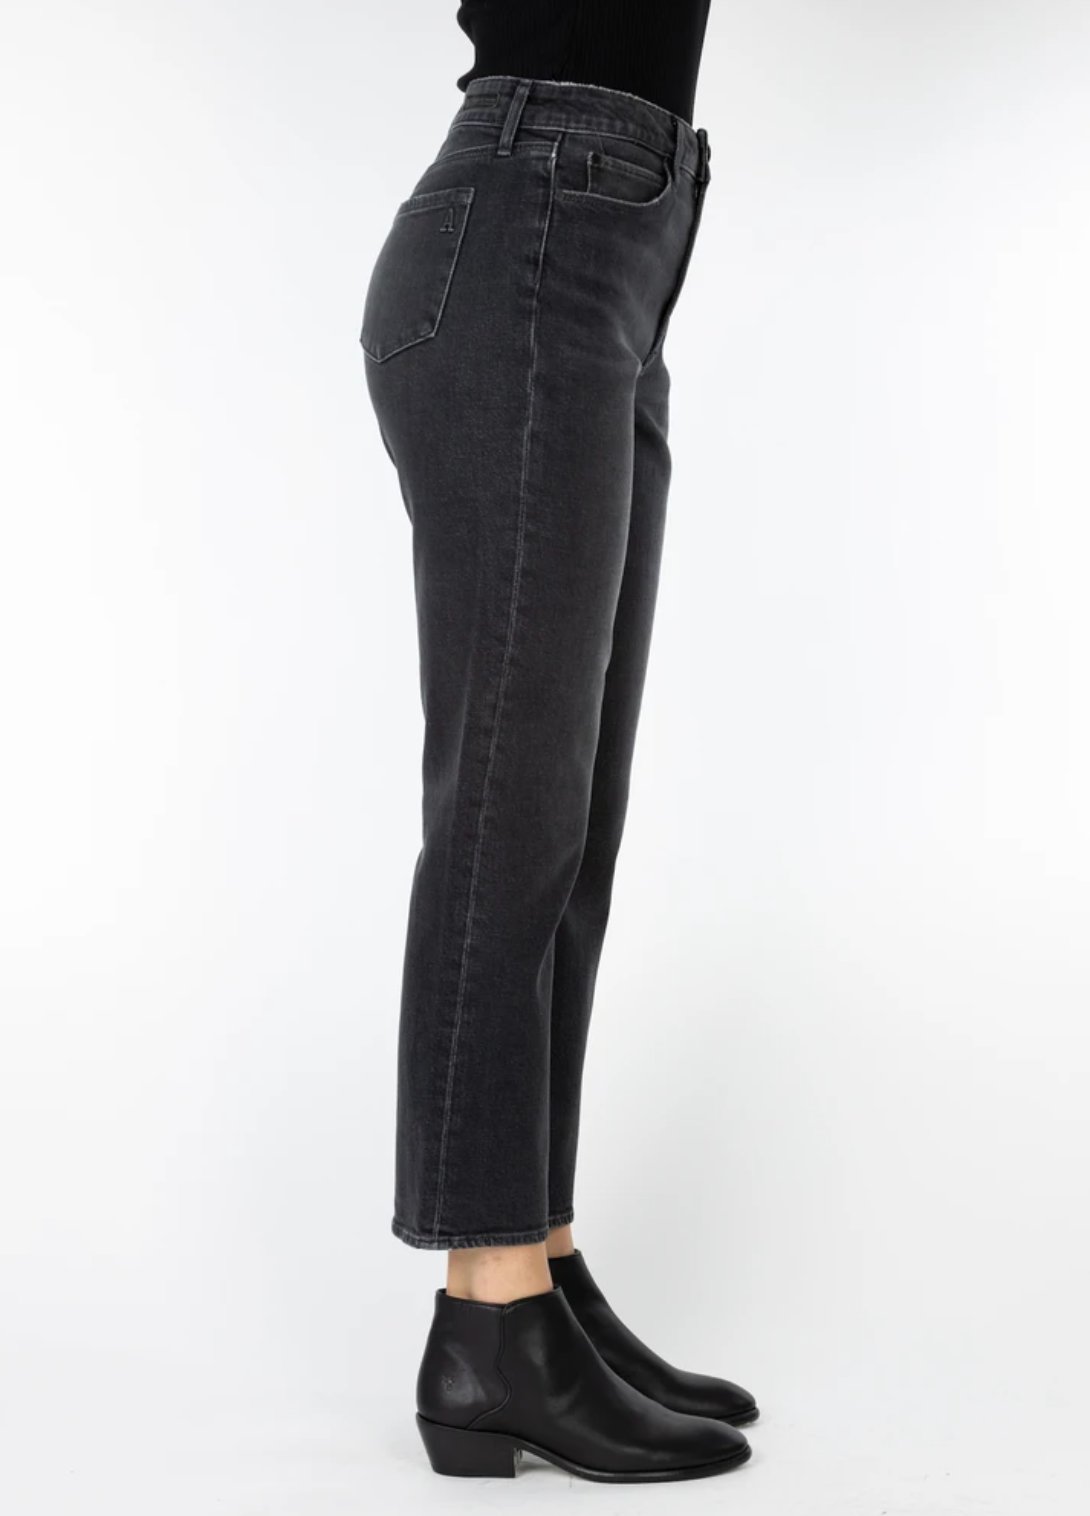 The Kate Cropped Straight Leg Jeans by Articles of Society - Gillett